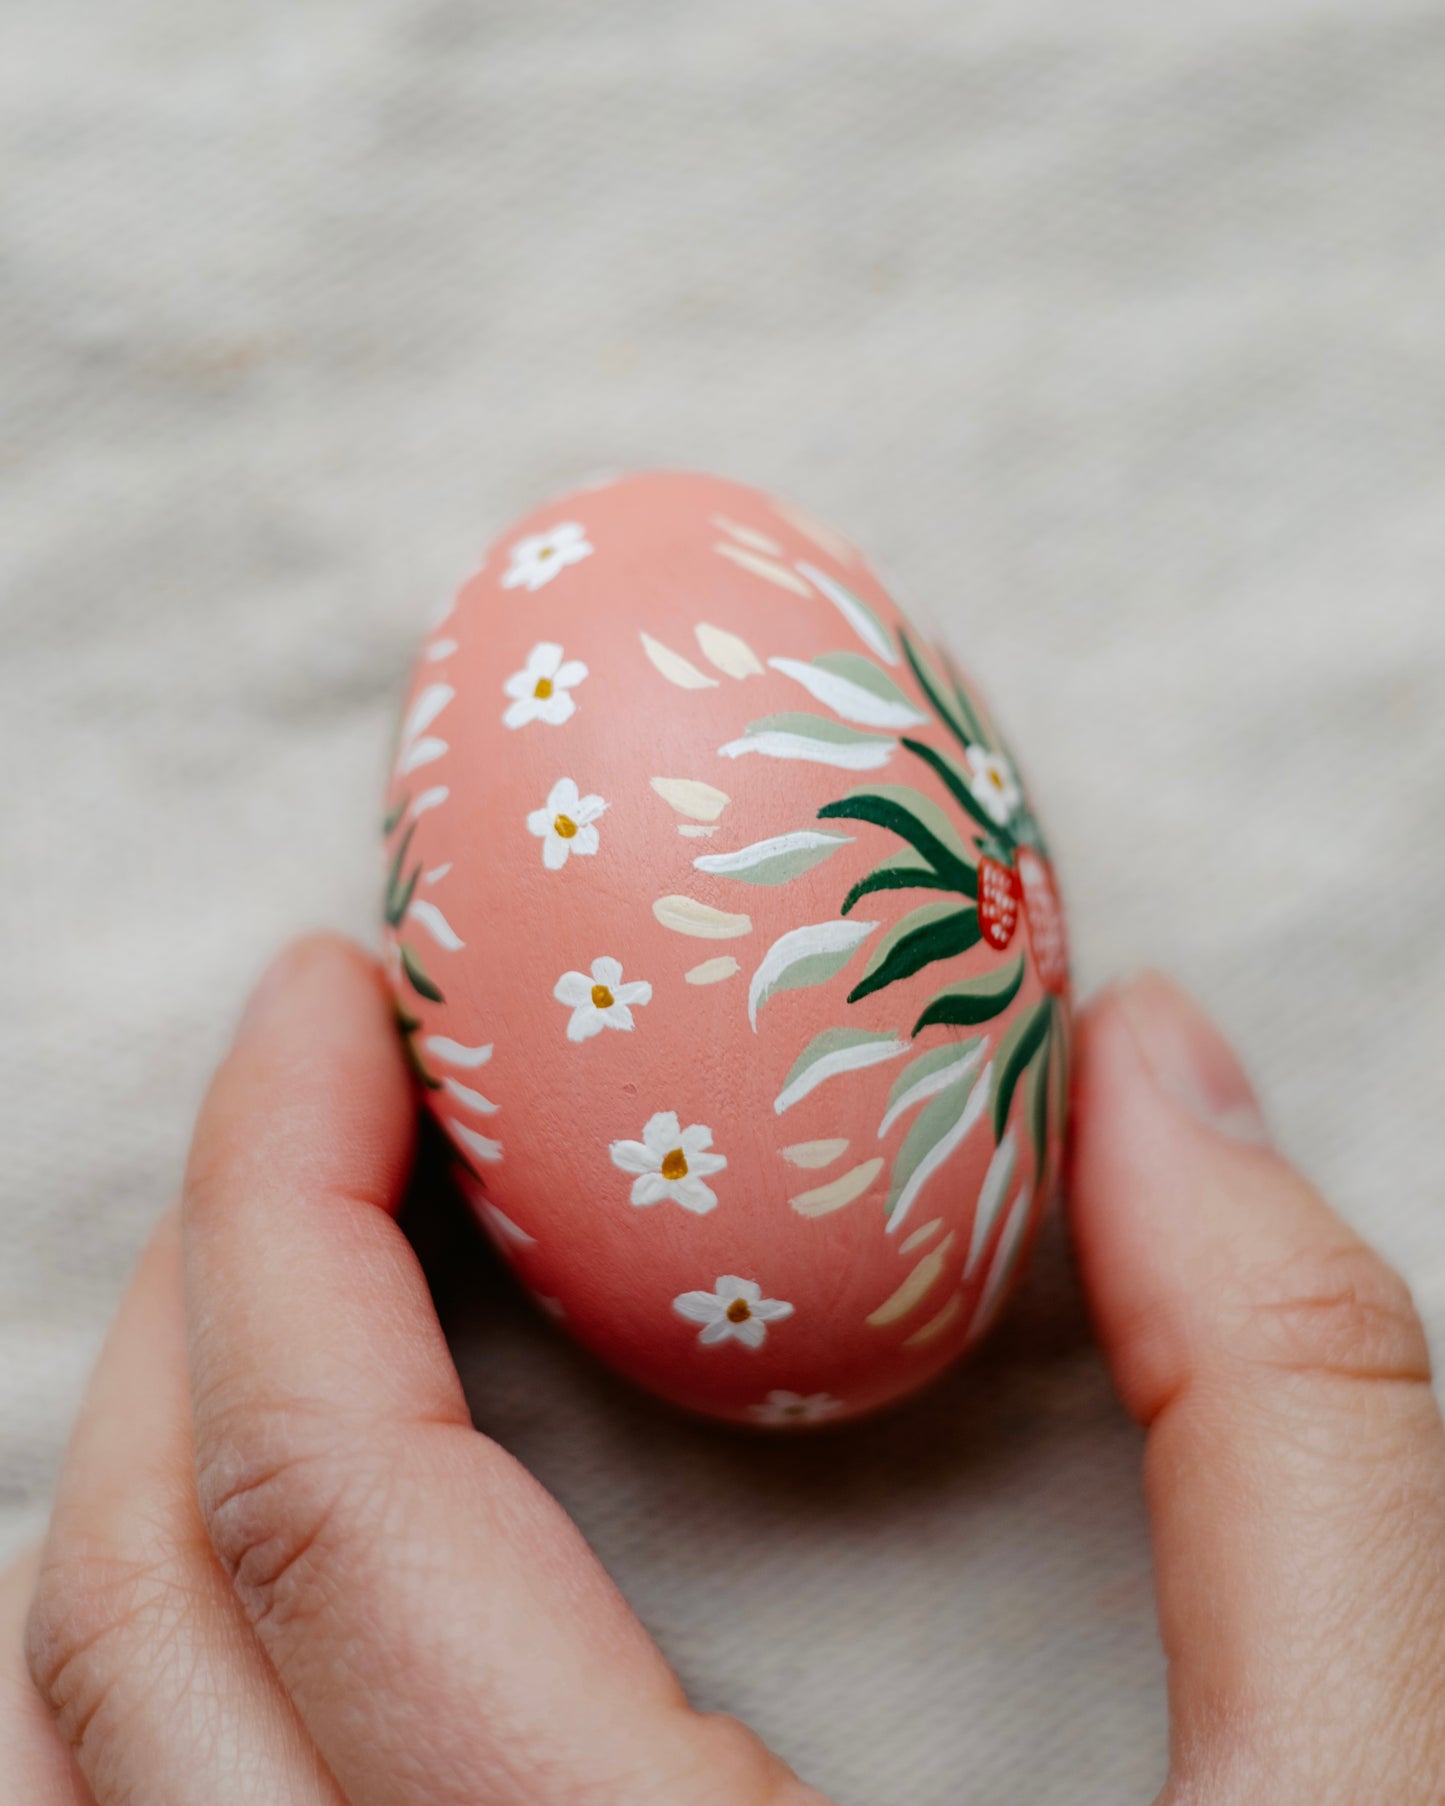 Heirloom Painted Egg- no. 11